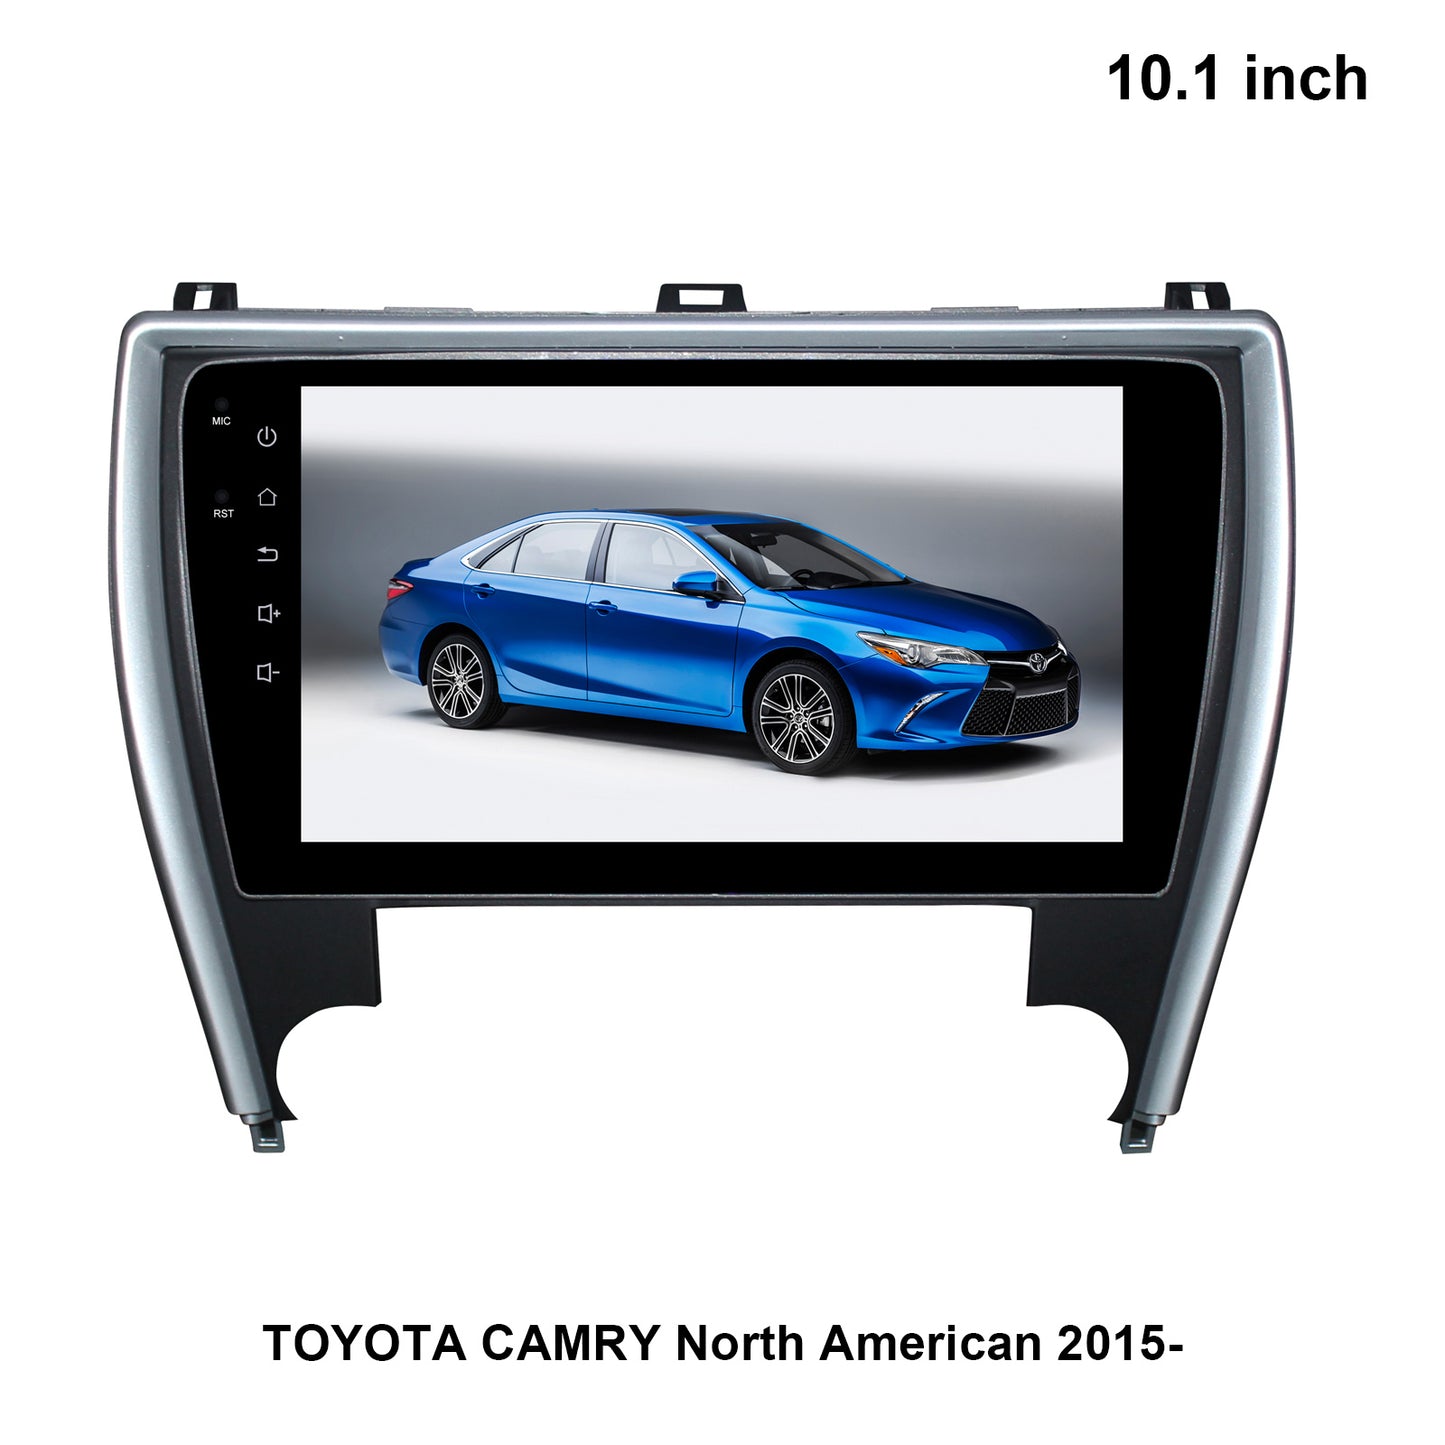 10.1" Octa-core Quad-core Android Navigation Radio for Toyota Camry 2015 -